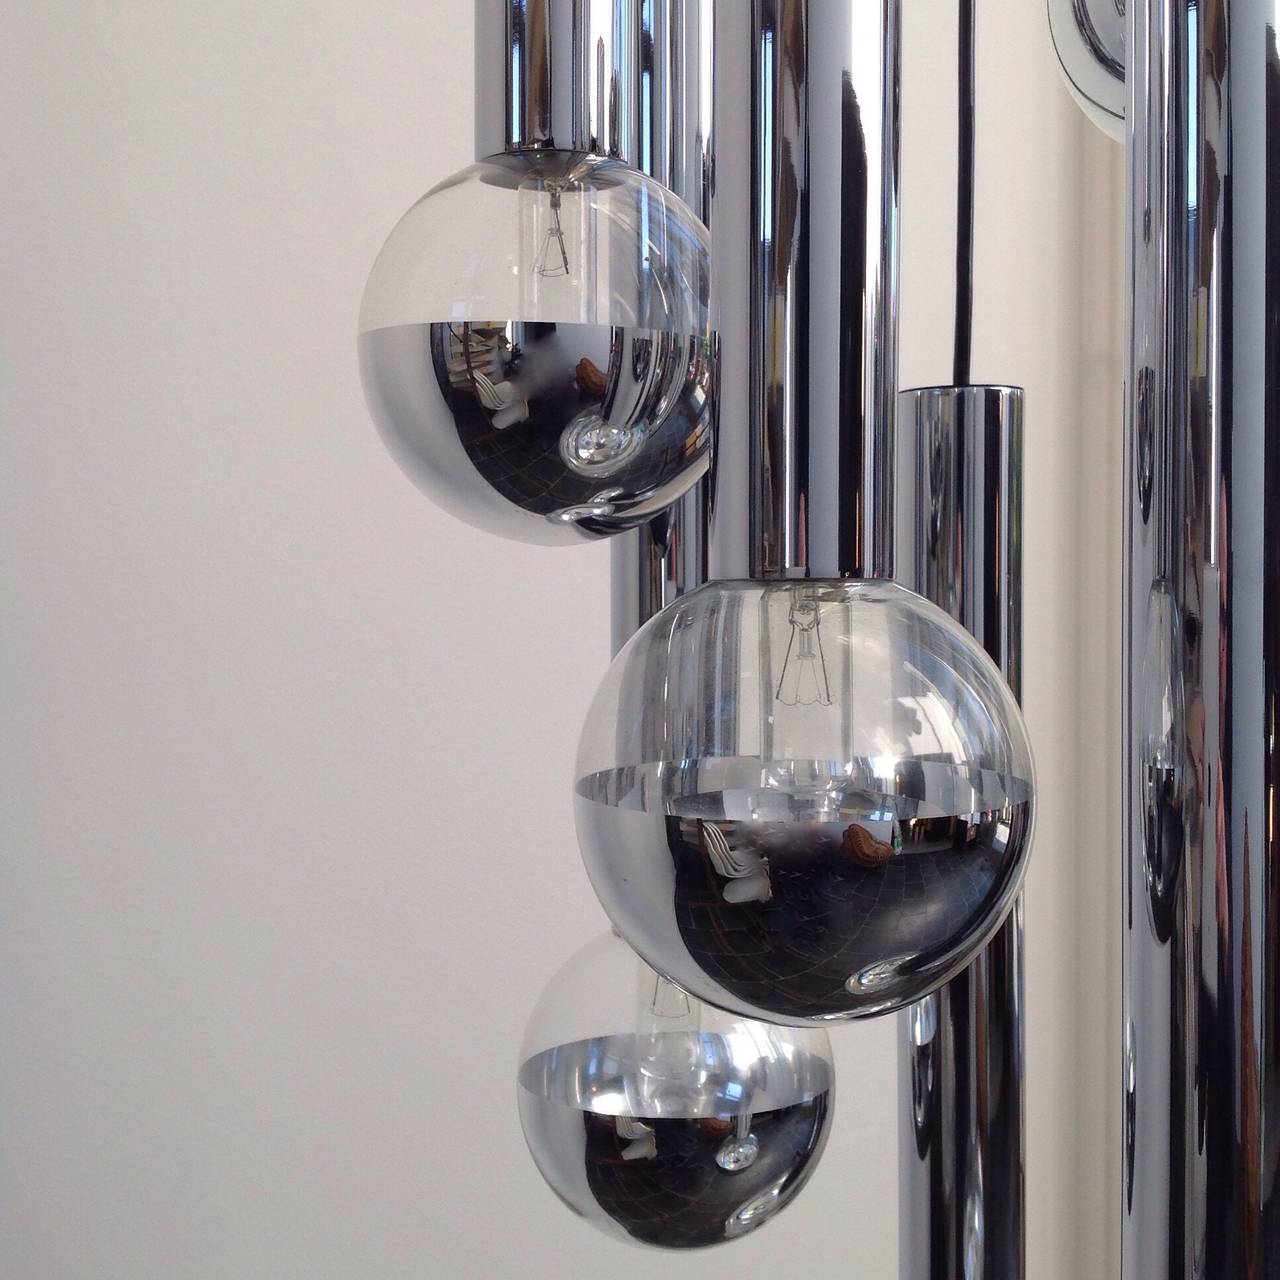 Large cascade lighting made by Staff Leuchten (Germany), design Motoko Ishii.
This sophisticated hanging lamp gives a beautiful light effect.
Ceiling lamp with six chromed metal tubes from three different heights with hand blown glass mirror balls